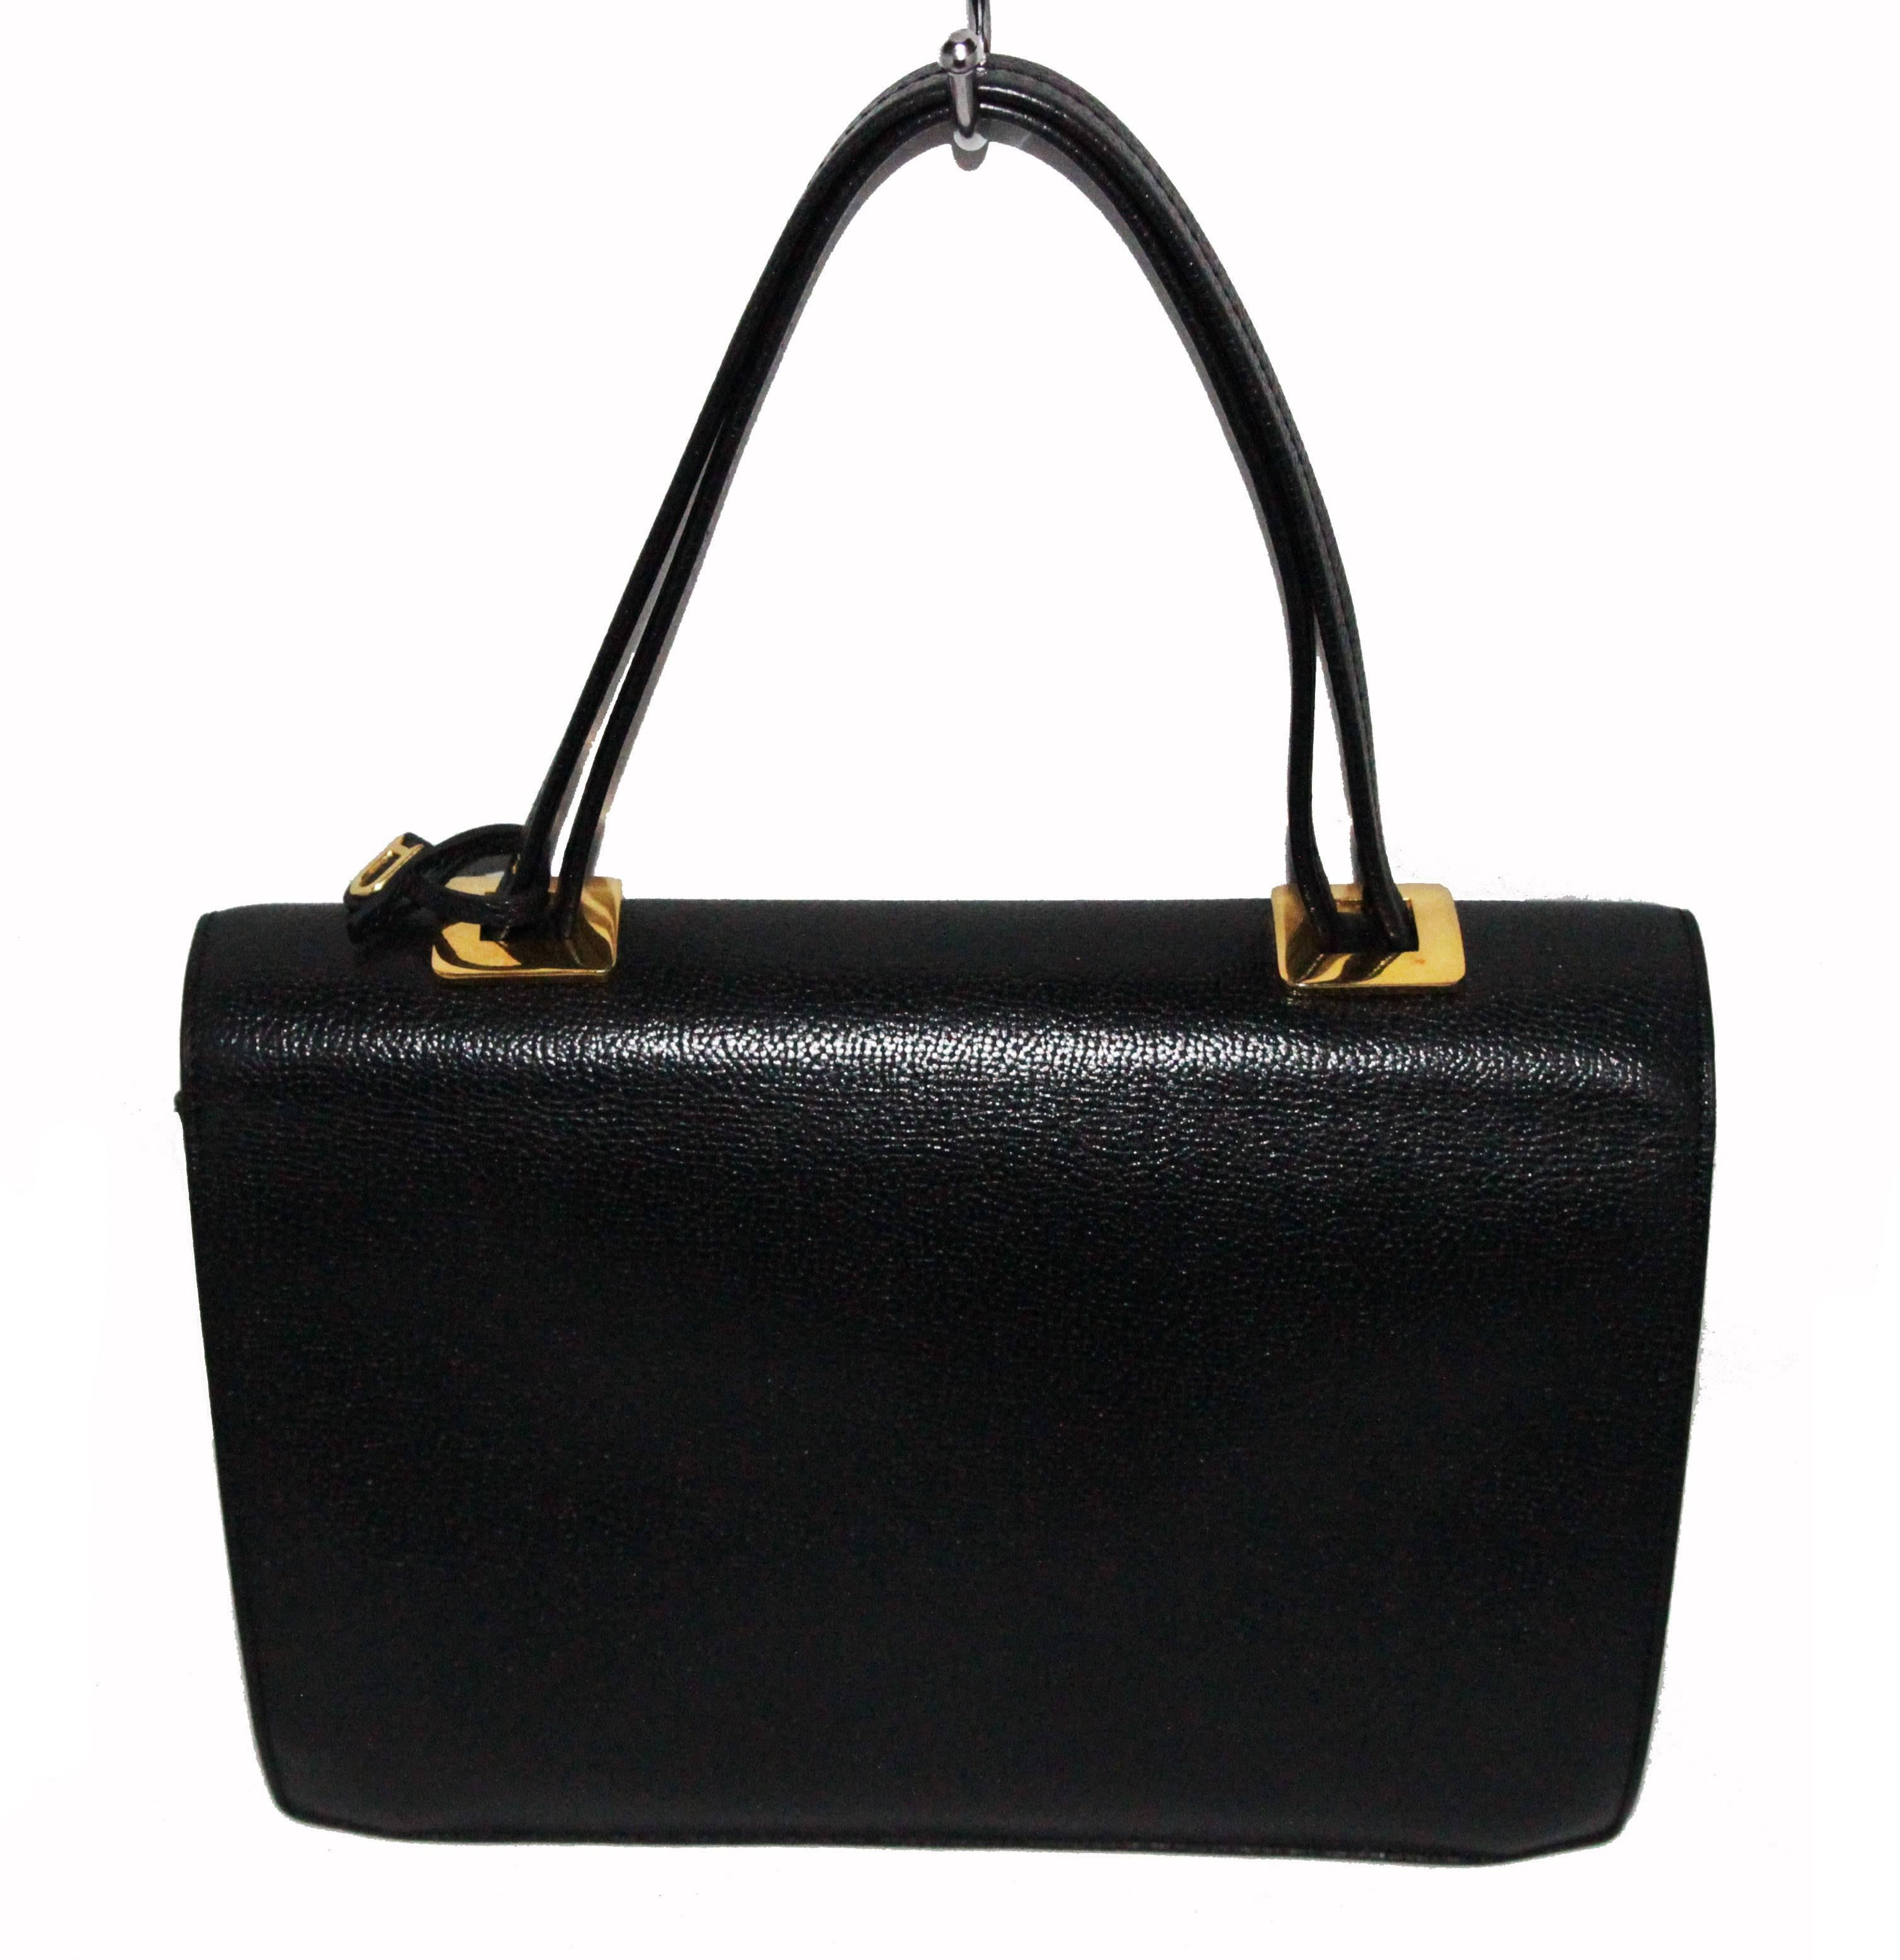 Very elegant and rare Delvaux vintage handbag. In the style of the 